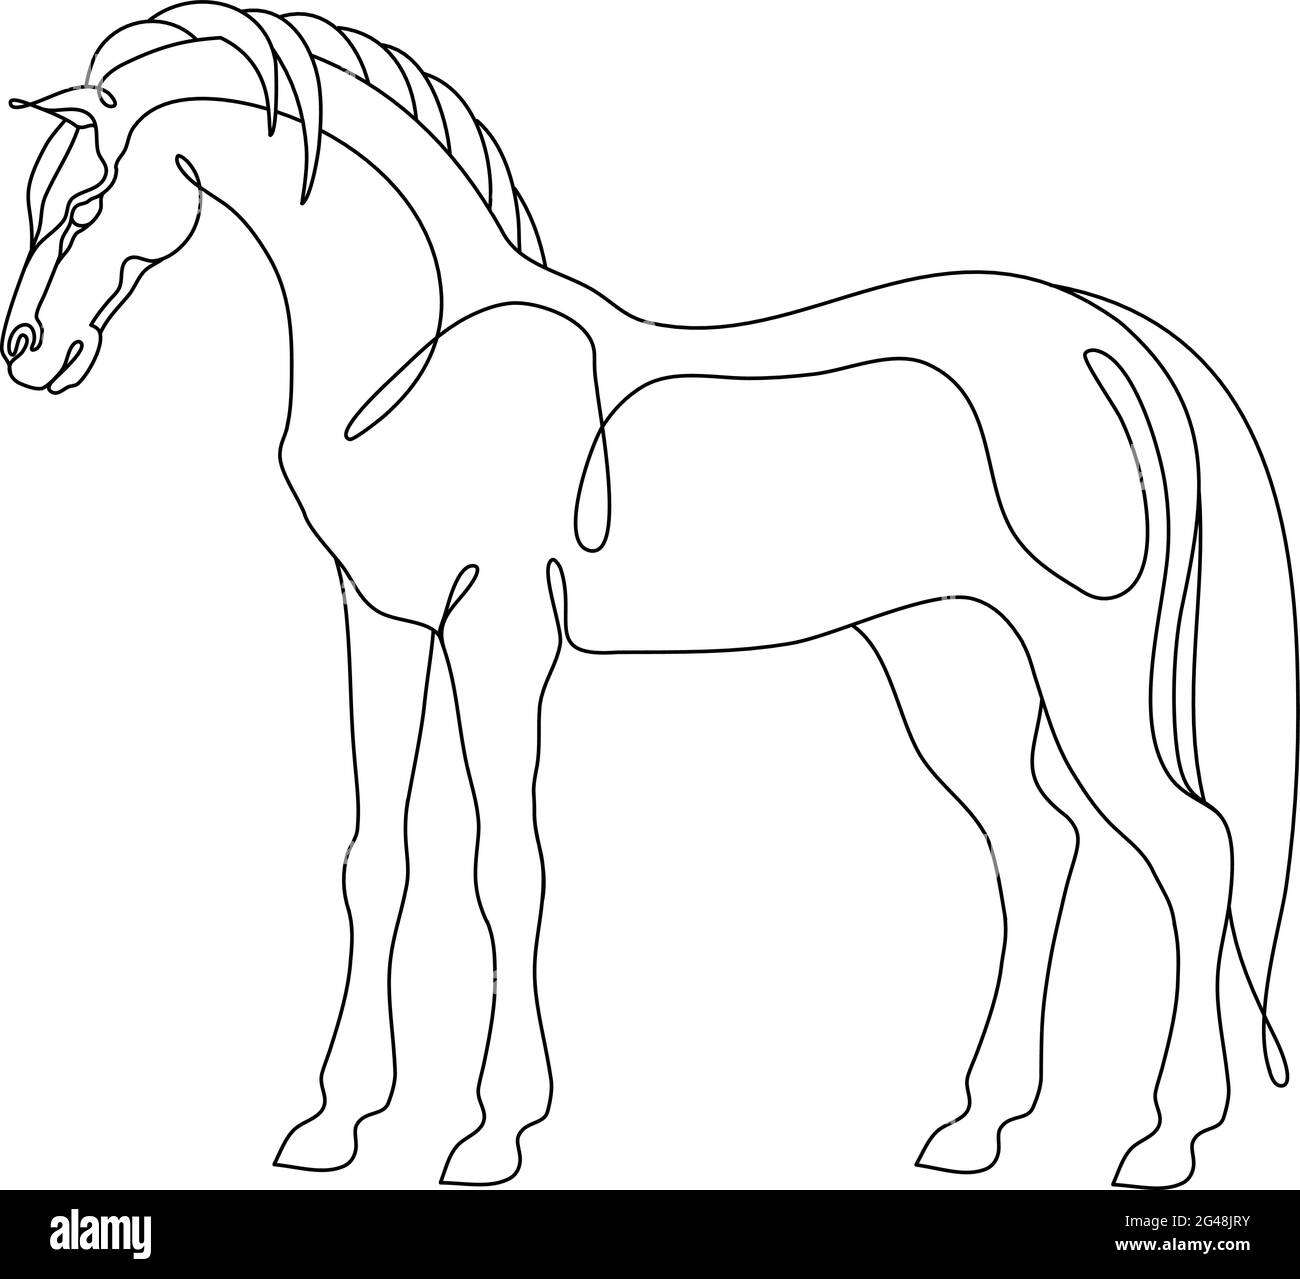 One line horse design silhouette. Hand drawn minimalism style vector illustration. Stock Vector